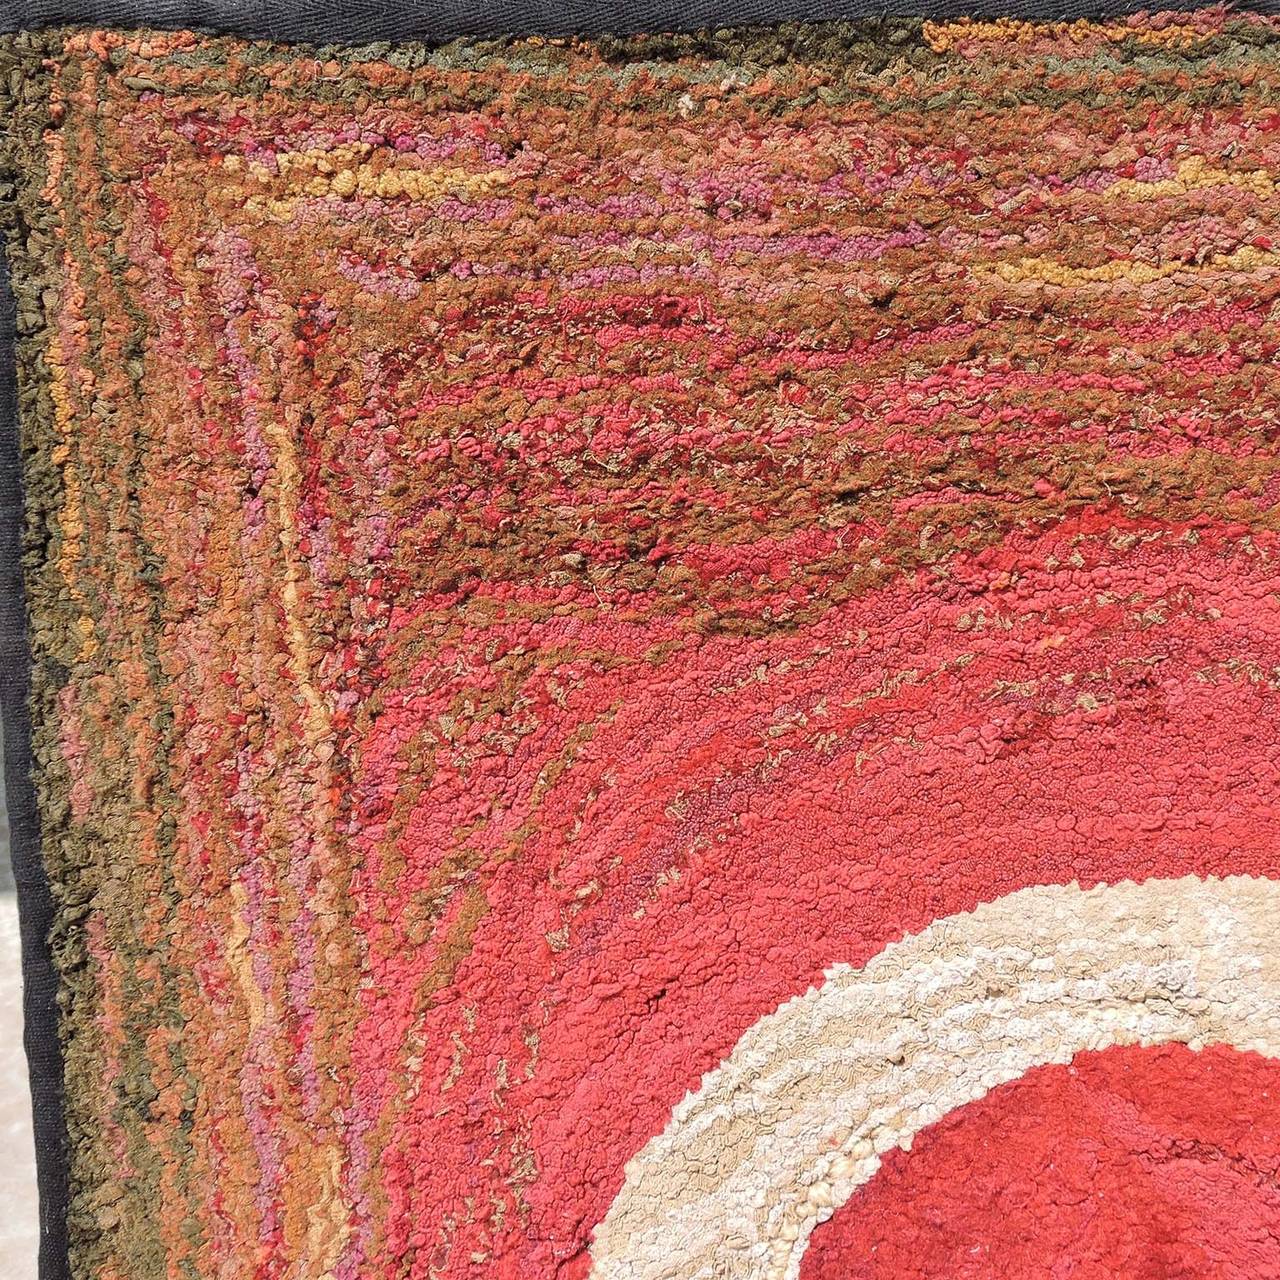 Rare antique red and white hooked rug (possibly Shaker) mounted as a wall decoration.
Dimensions: 46 x 29 1/2 inches.